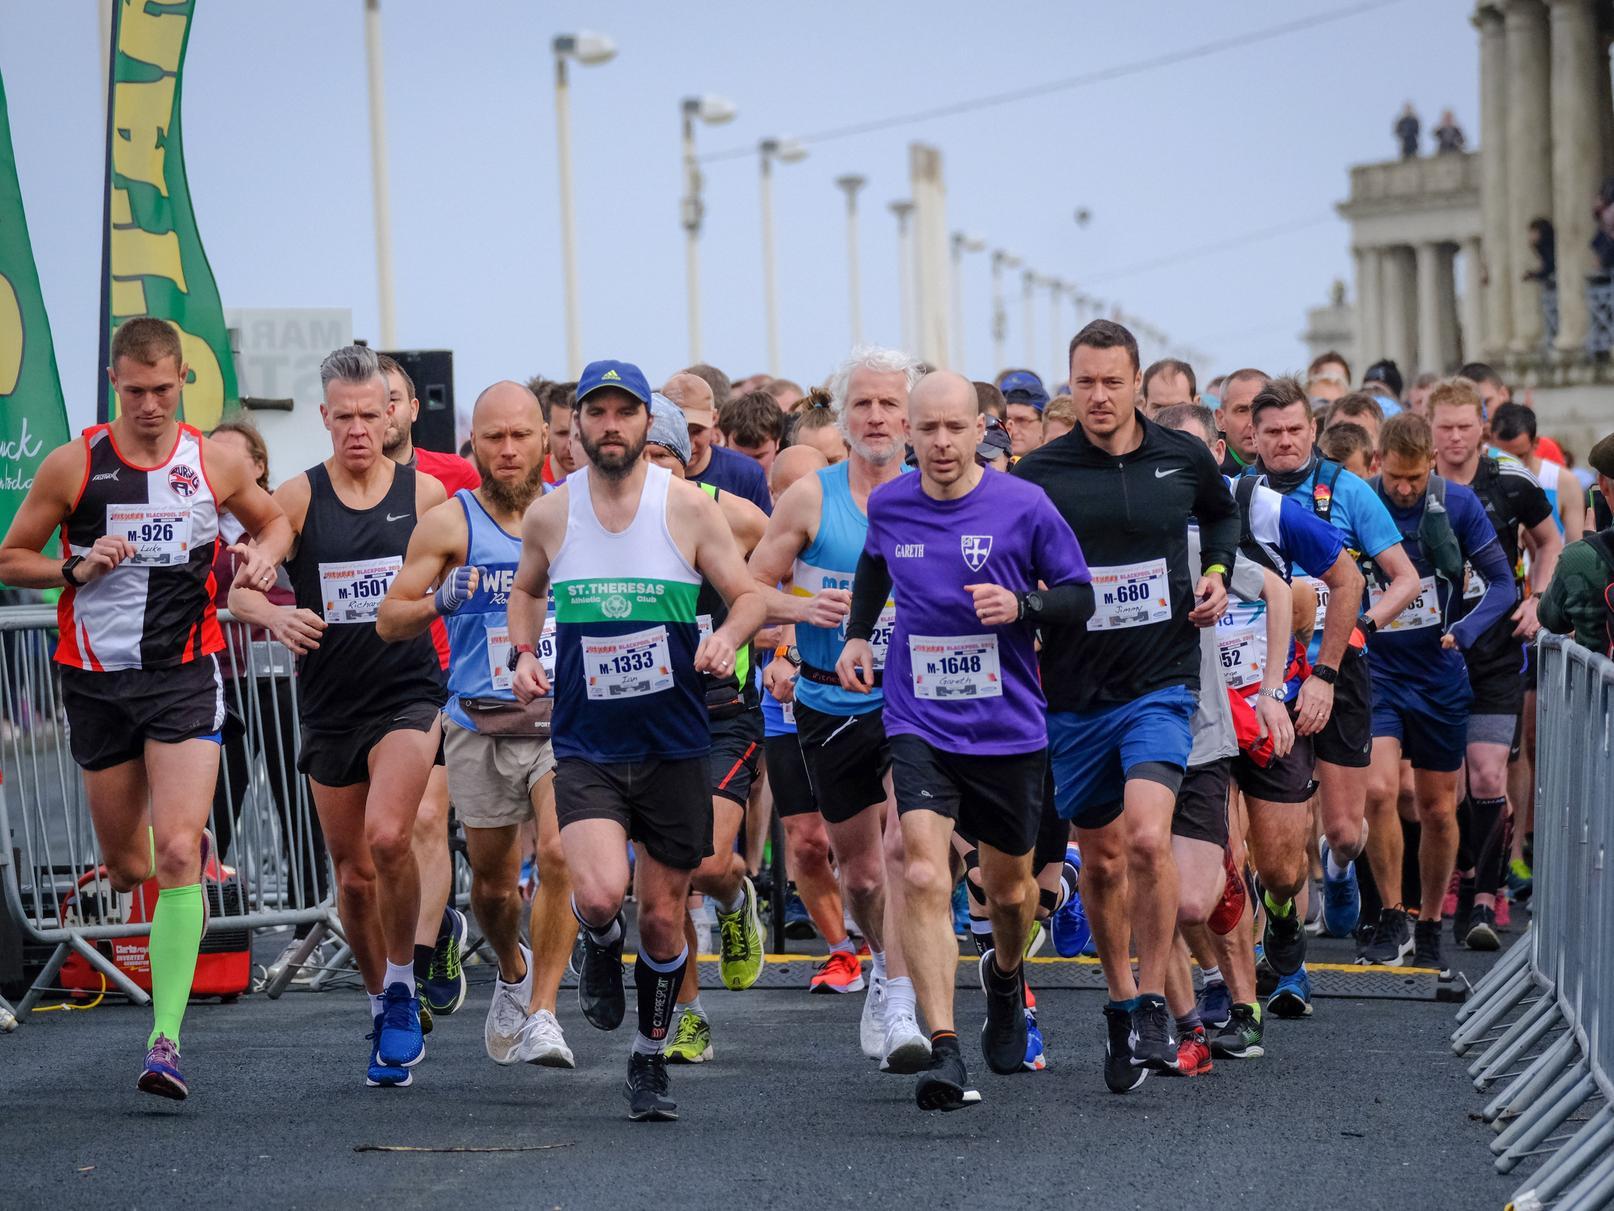 Blackpool's marathon is a two lap flat course which takes place on April 26, 2020. Race facilities include bottled water stations, toilets, live electronic results, full race commentary, race photography and full medical support. Tickets 27 pounds.